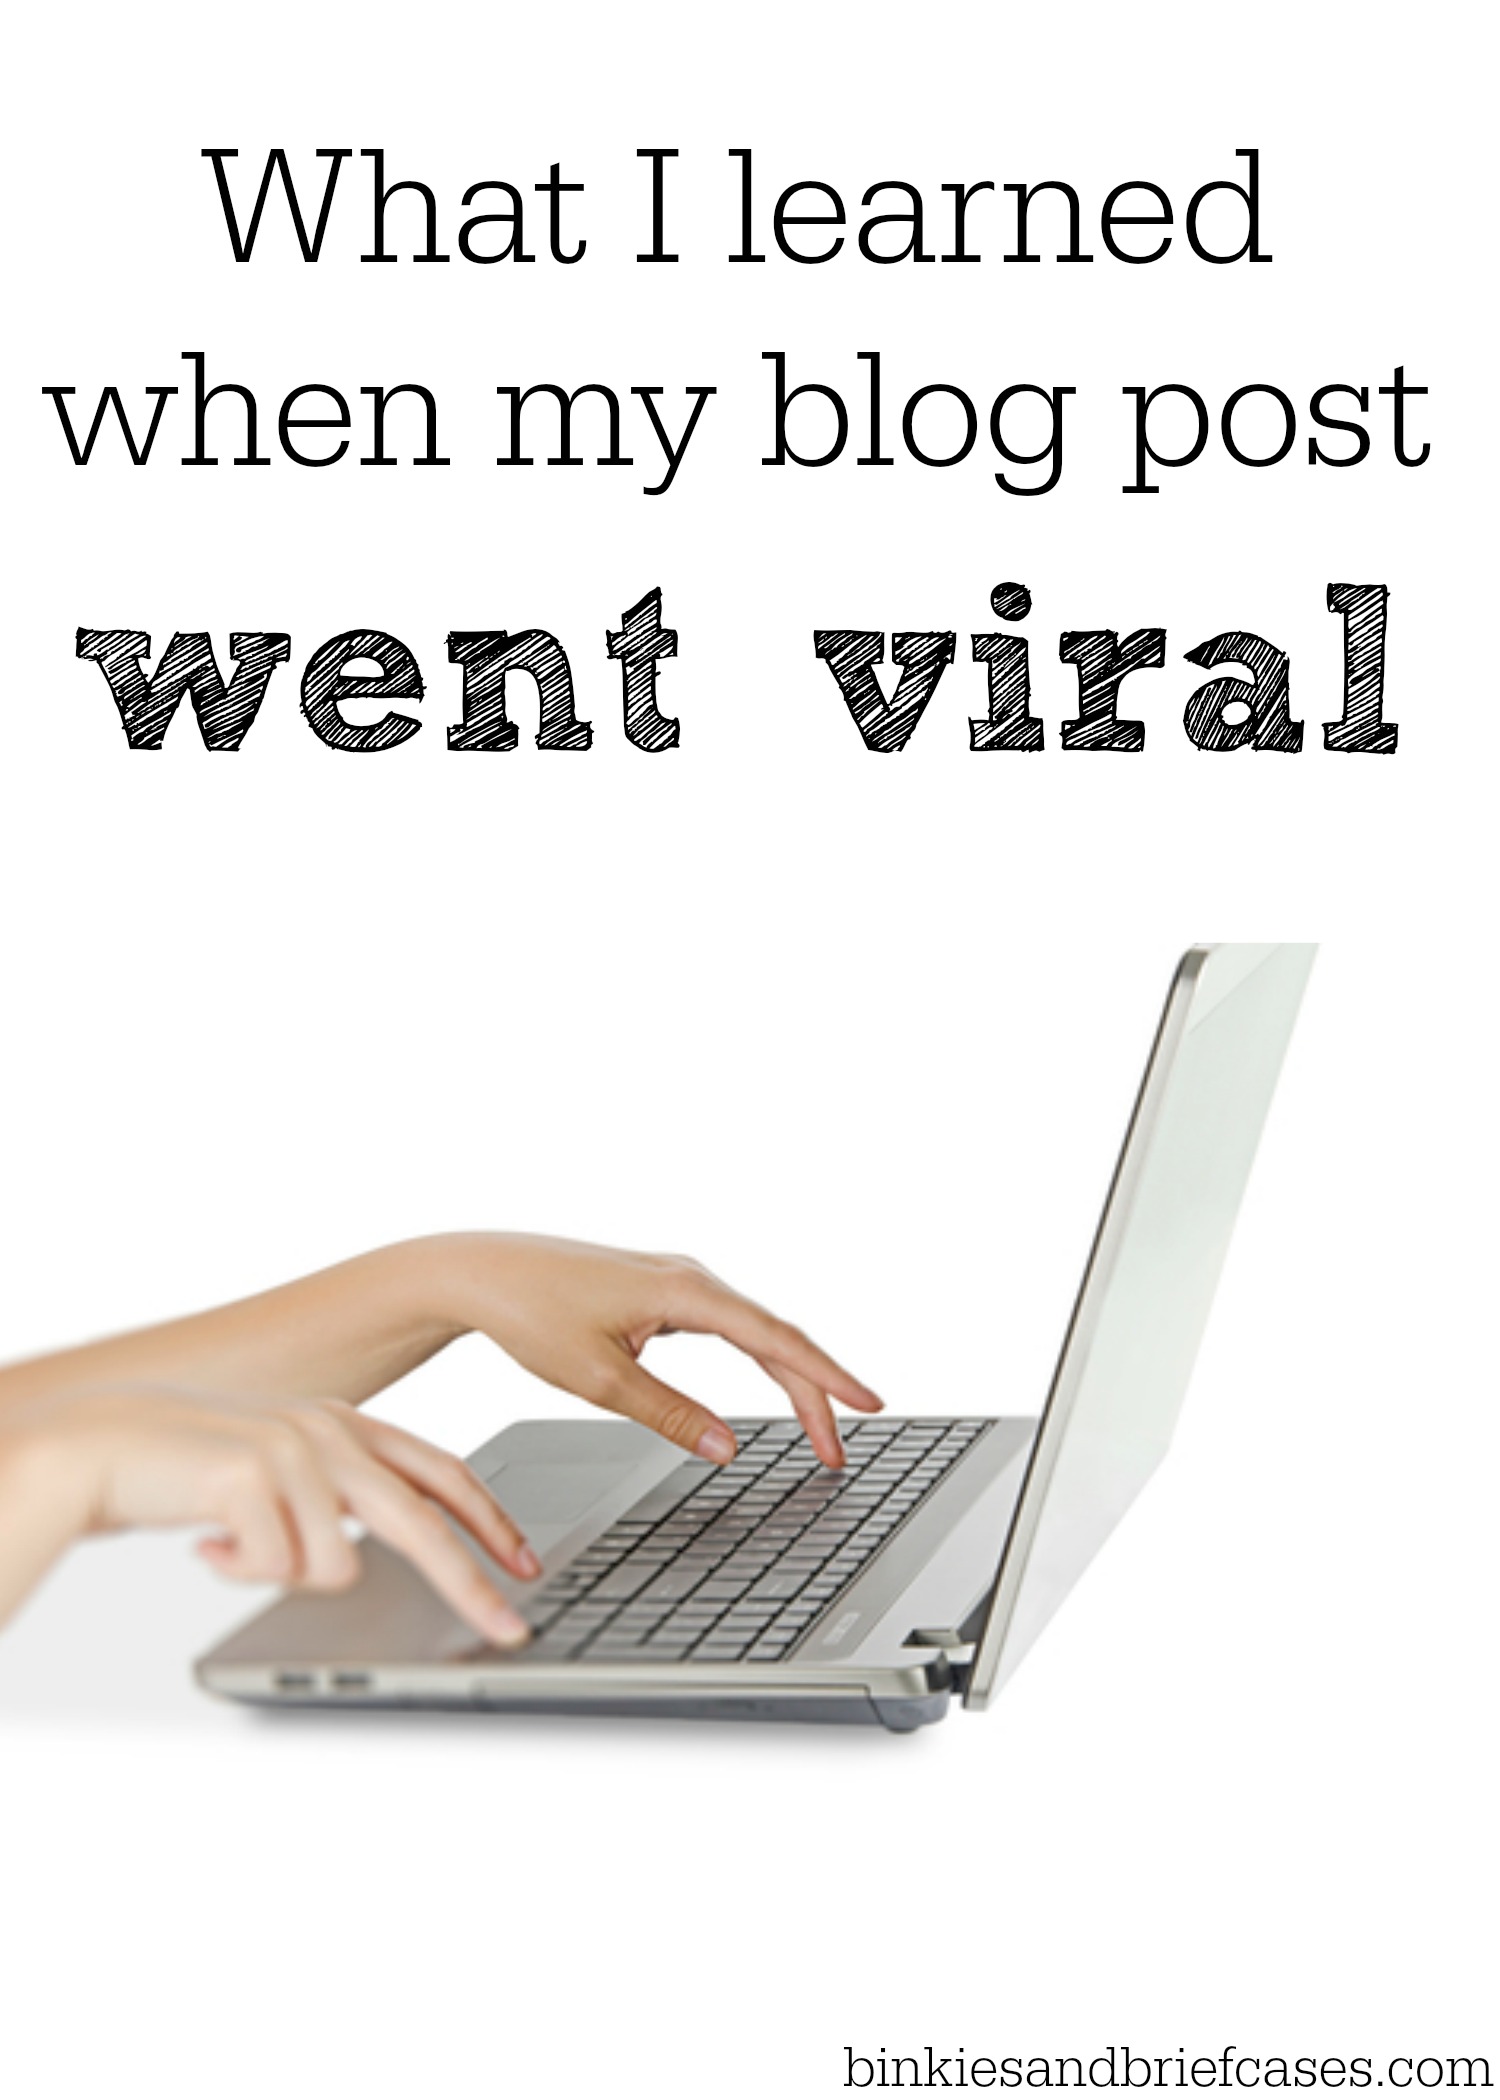 Great tips for how to keep followers around and control the infulx of new blog traffic when a blog post goes viral.